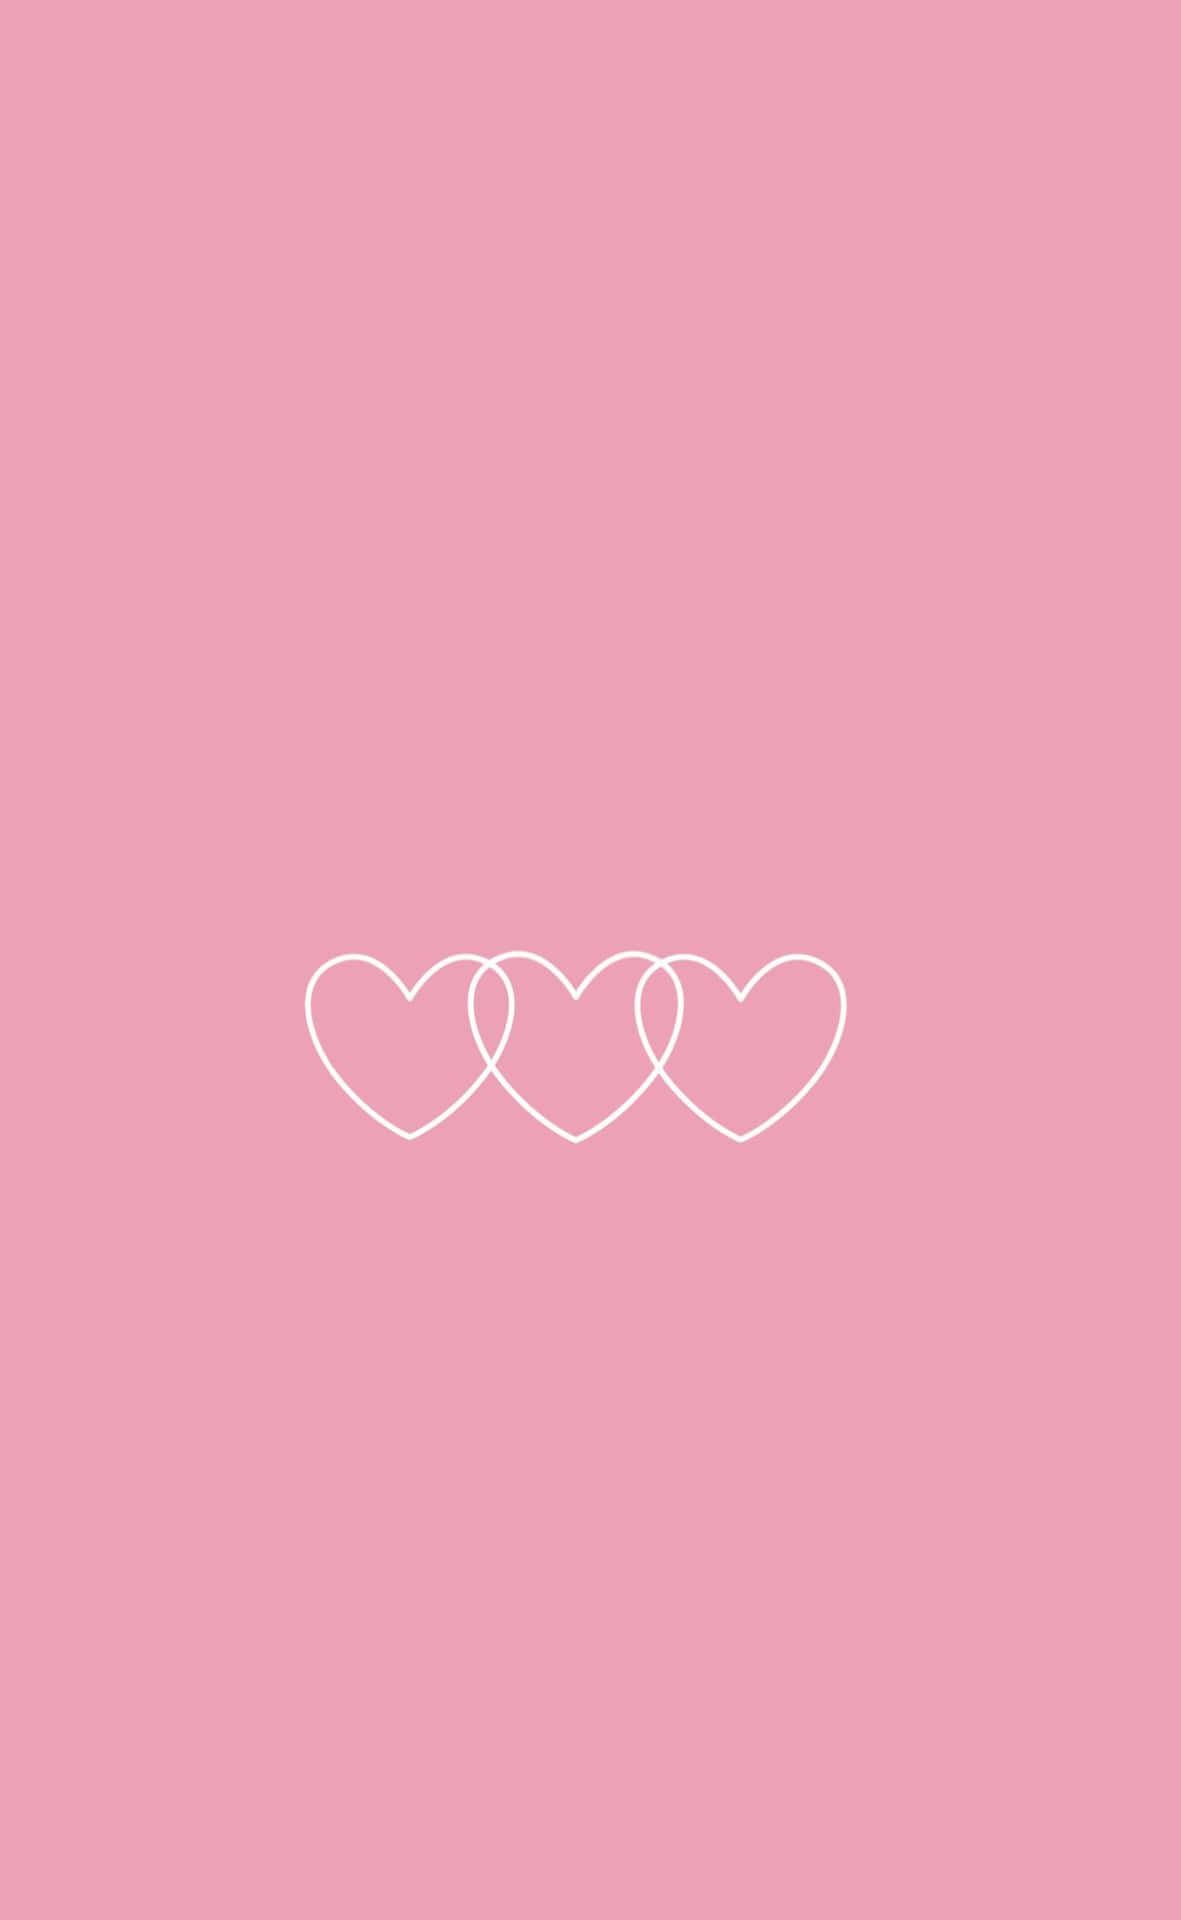 A White Heart Logo On A Pink Background